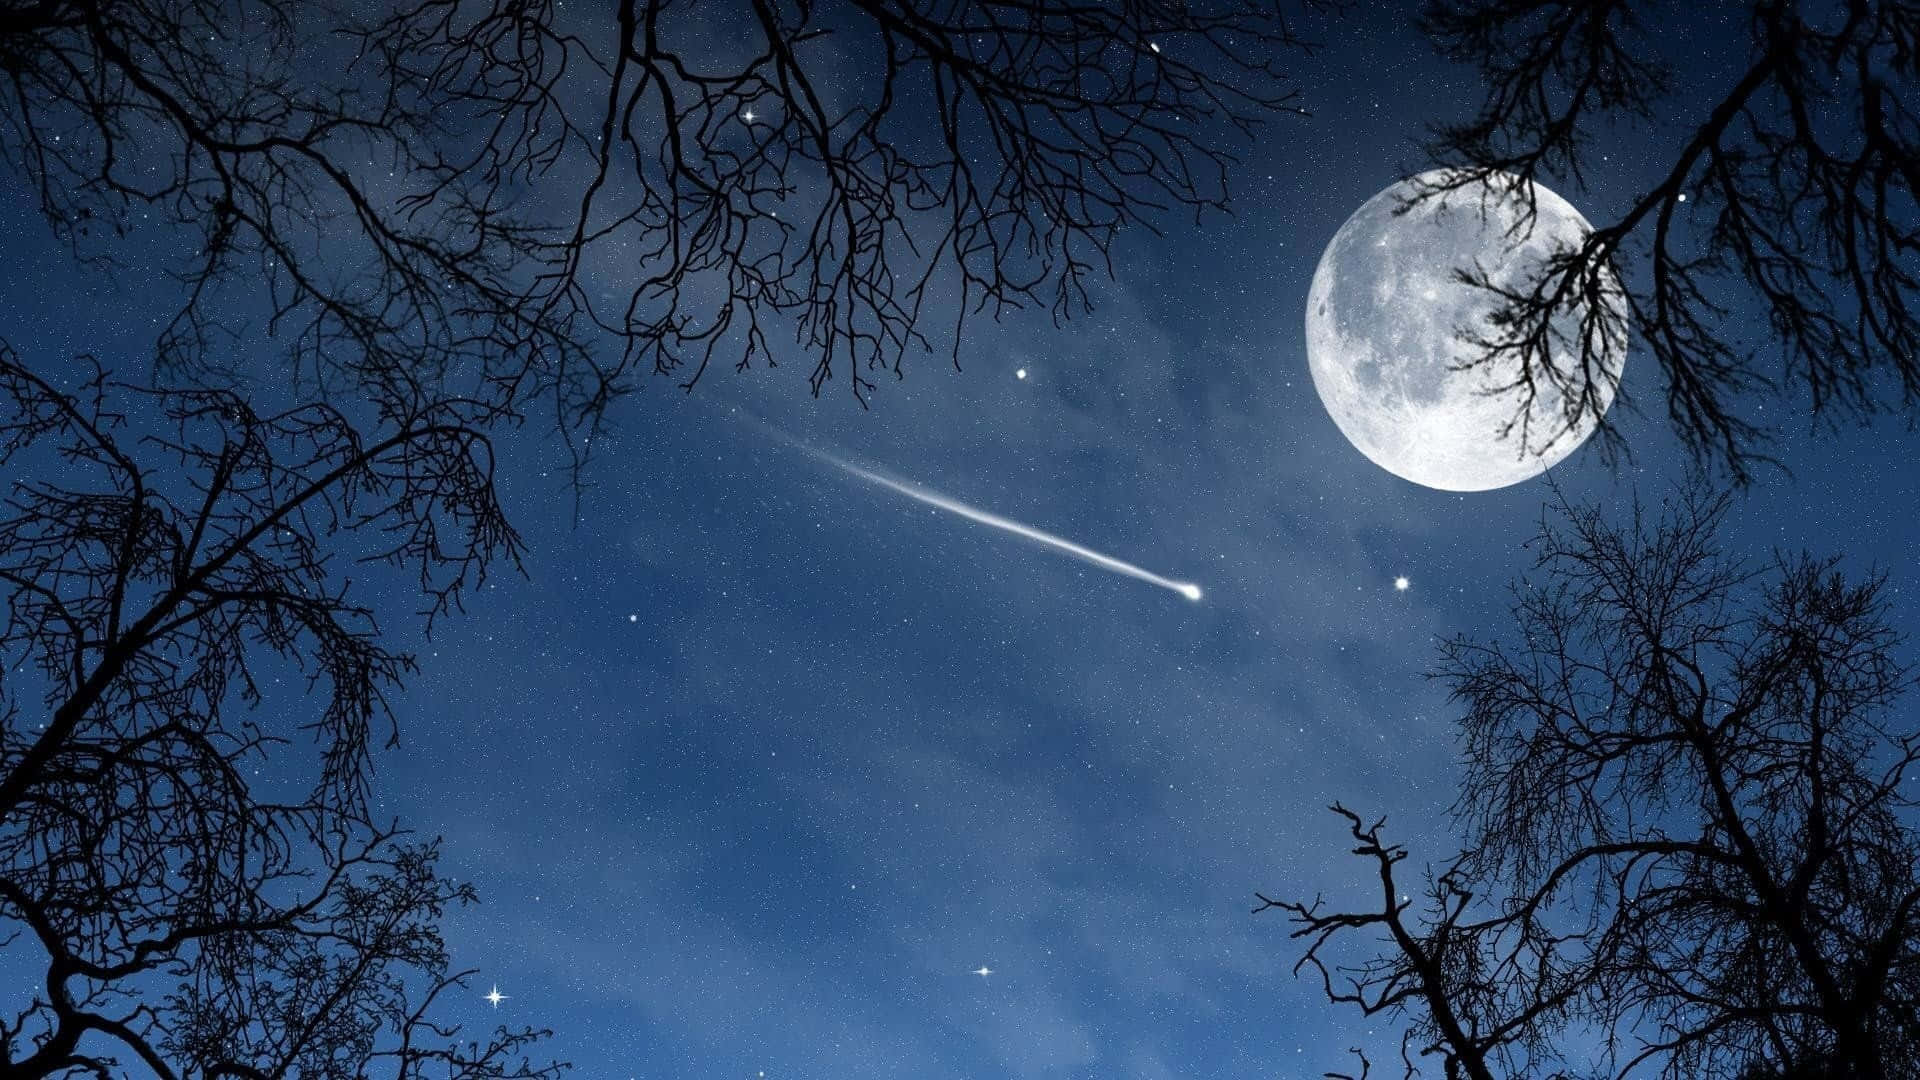 Night Sky Moon And Shooting Star Picture